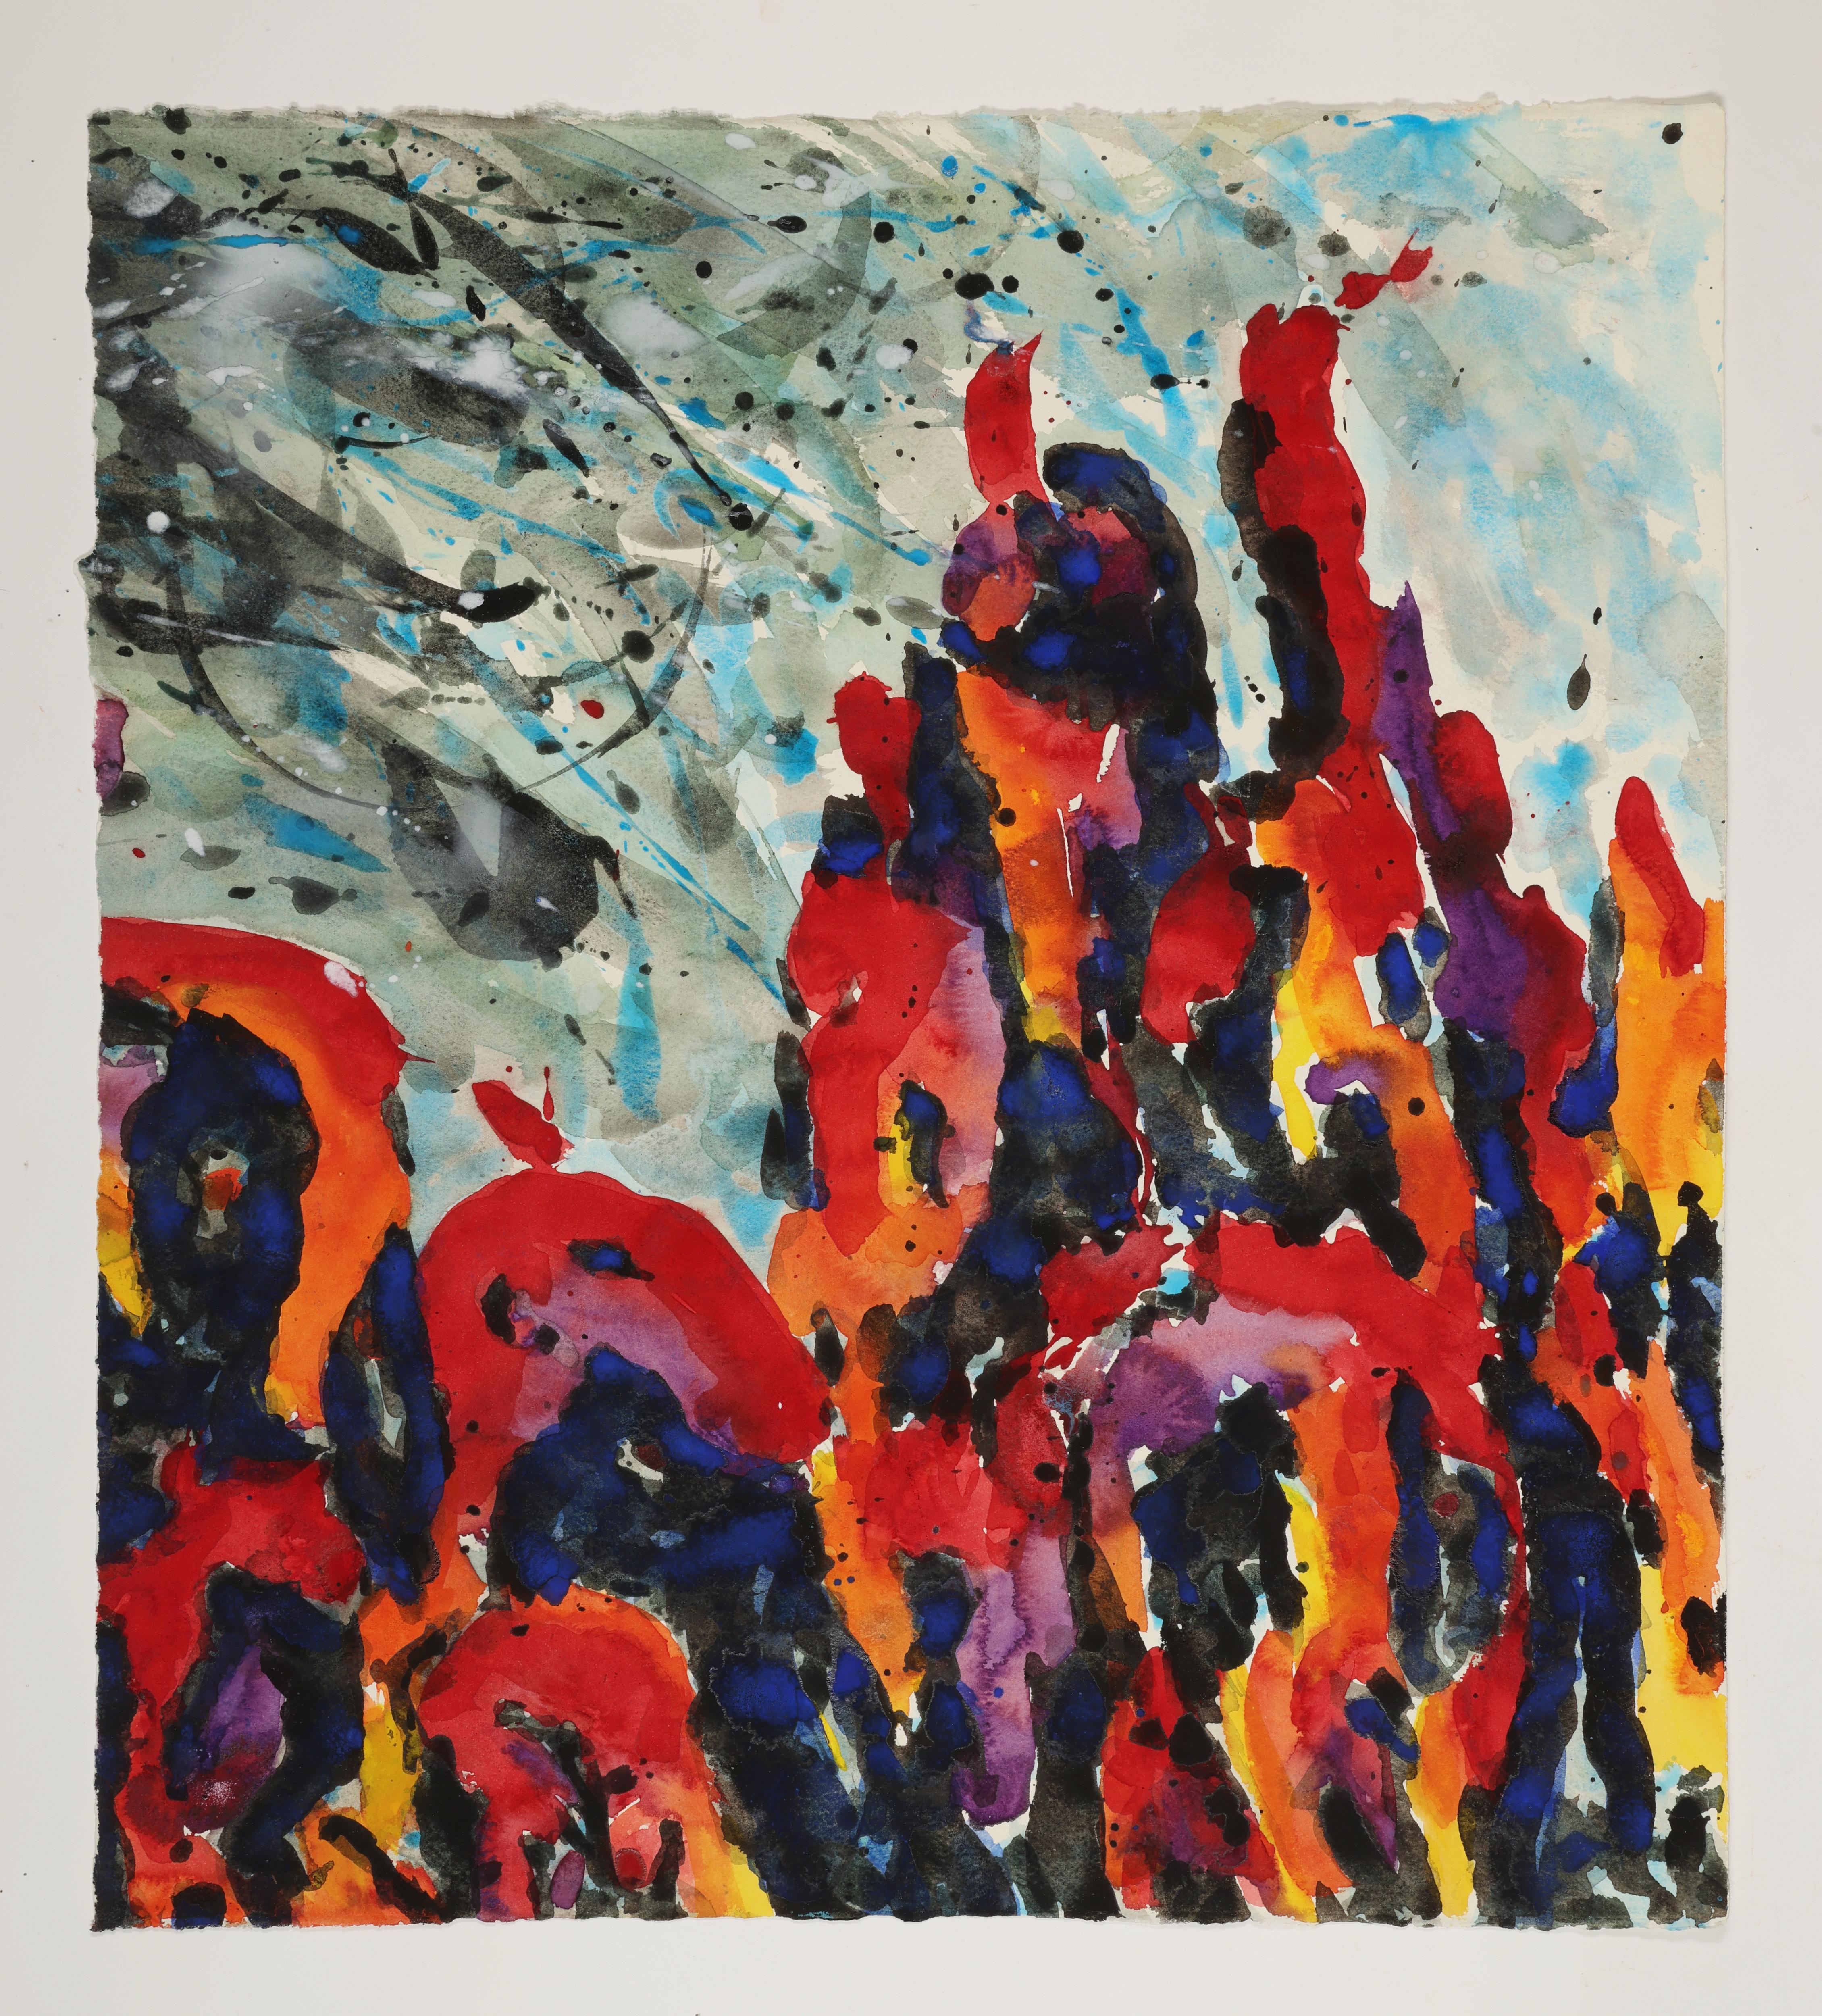 Abstract Watercolor Painting, 'Design for Land', C. 1997 by David Ruth